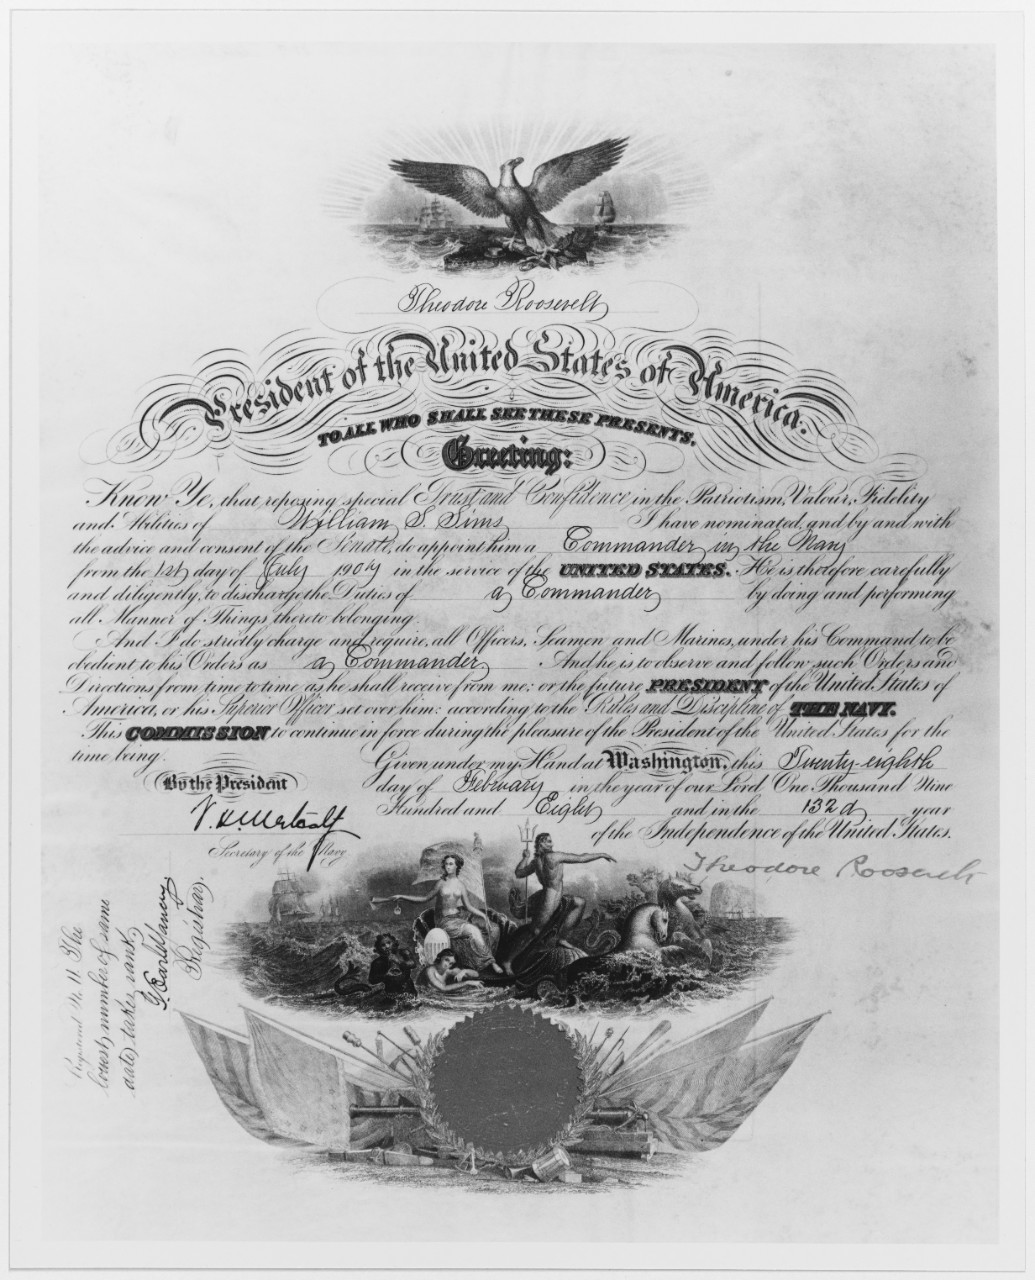 Commissioning certificate for William S. Sims, as Commander in the Navy